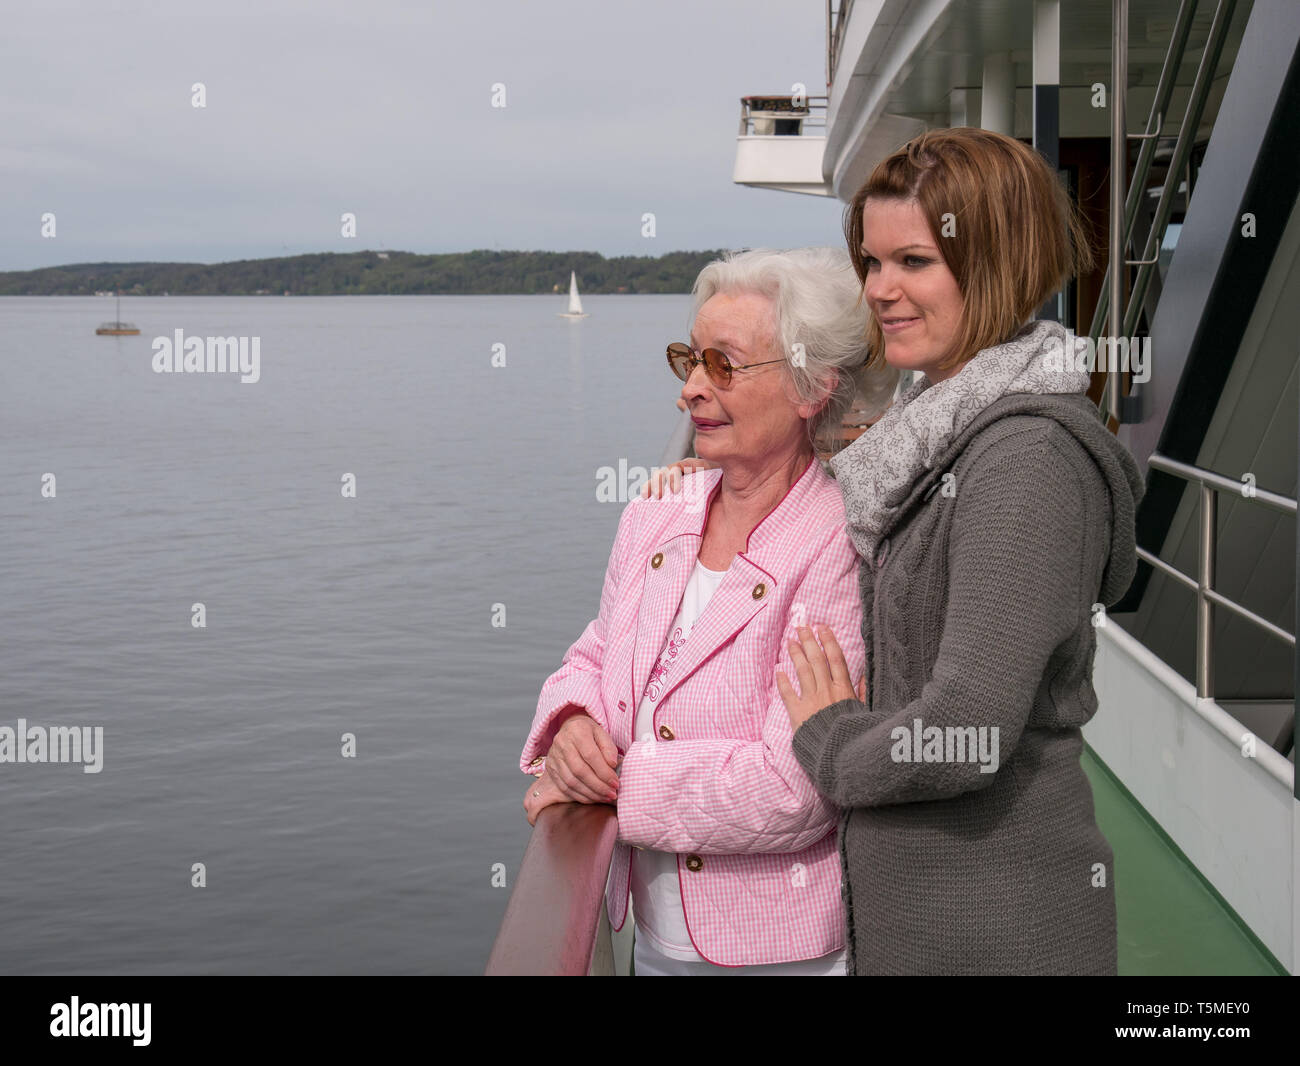 Senior lady with young woman making a boat trip Stock Photo